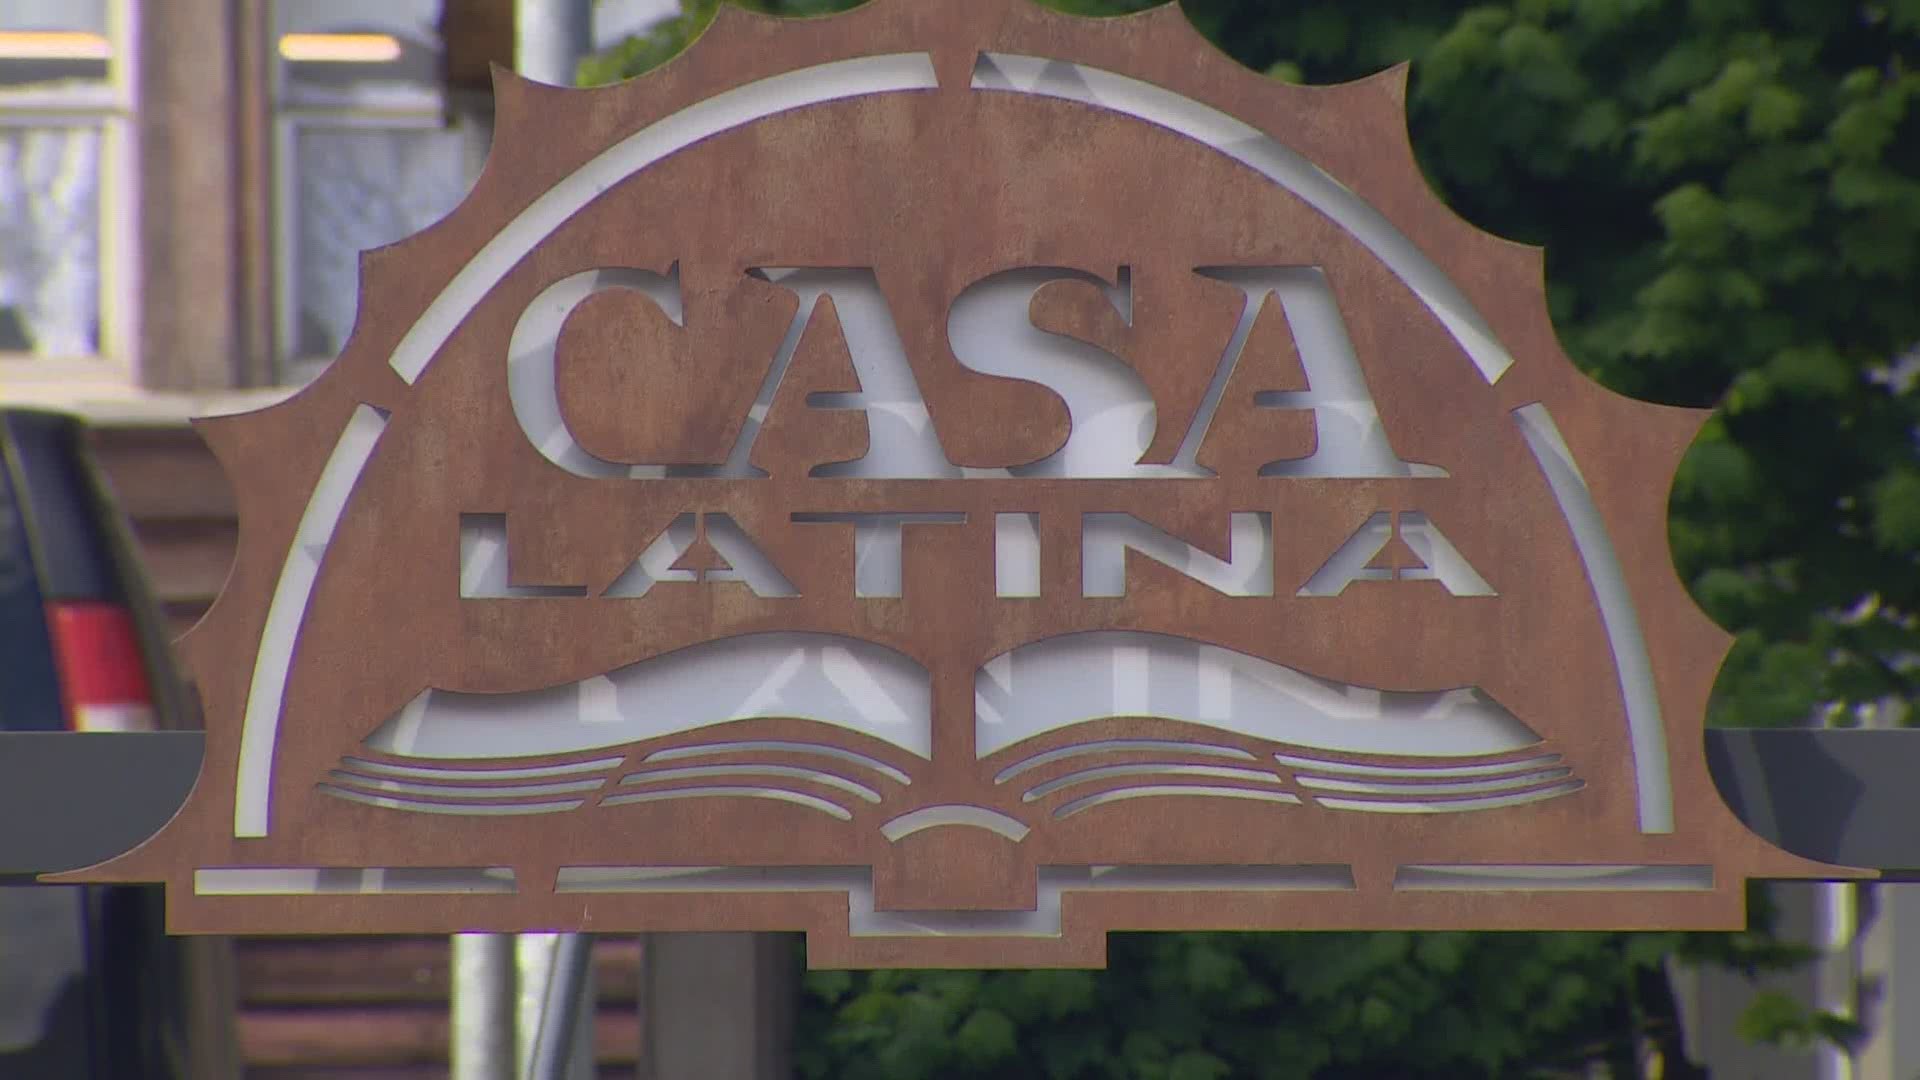 Protesters demanded Casa Latina do a better job of protecting its workers after a female employee accused a male superior of sexual misconduct.